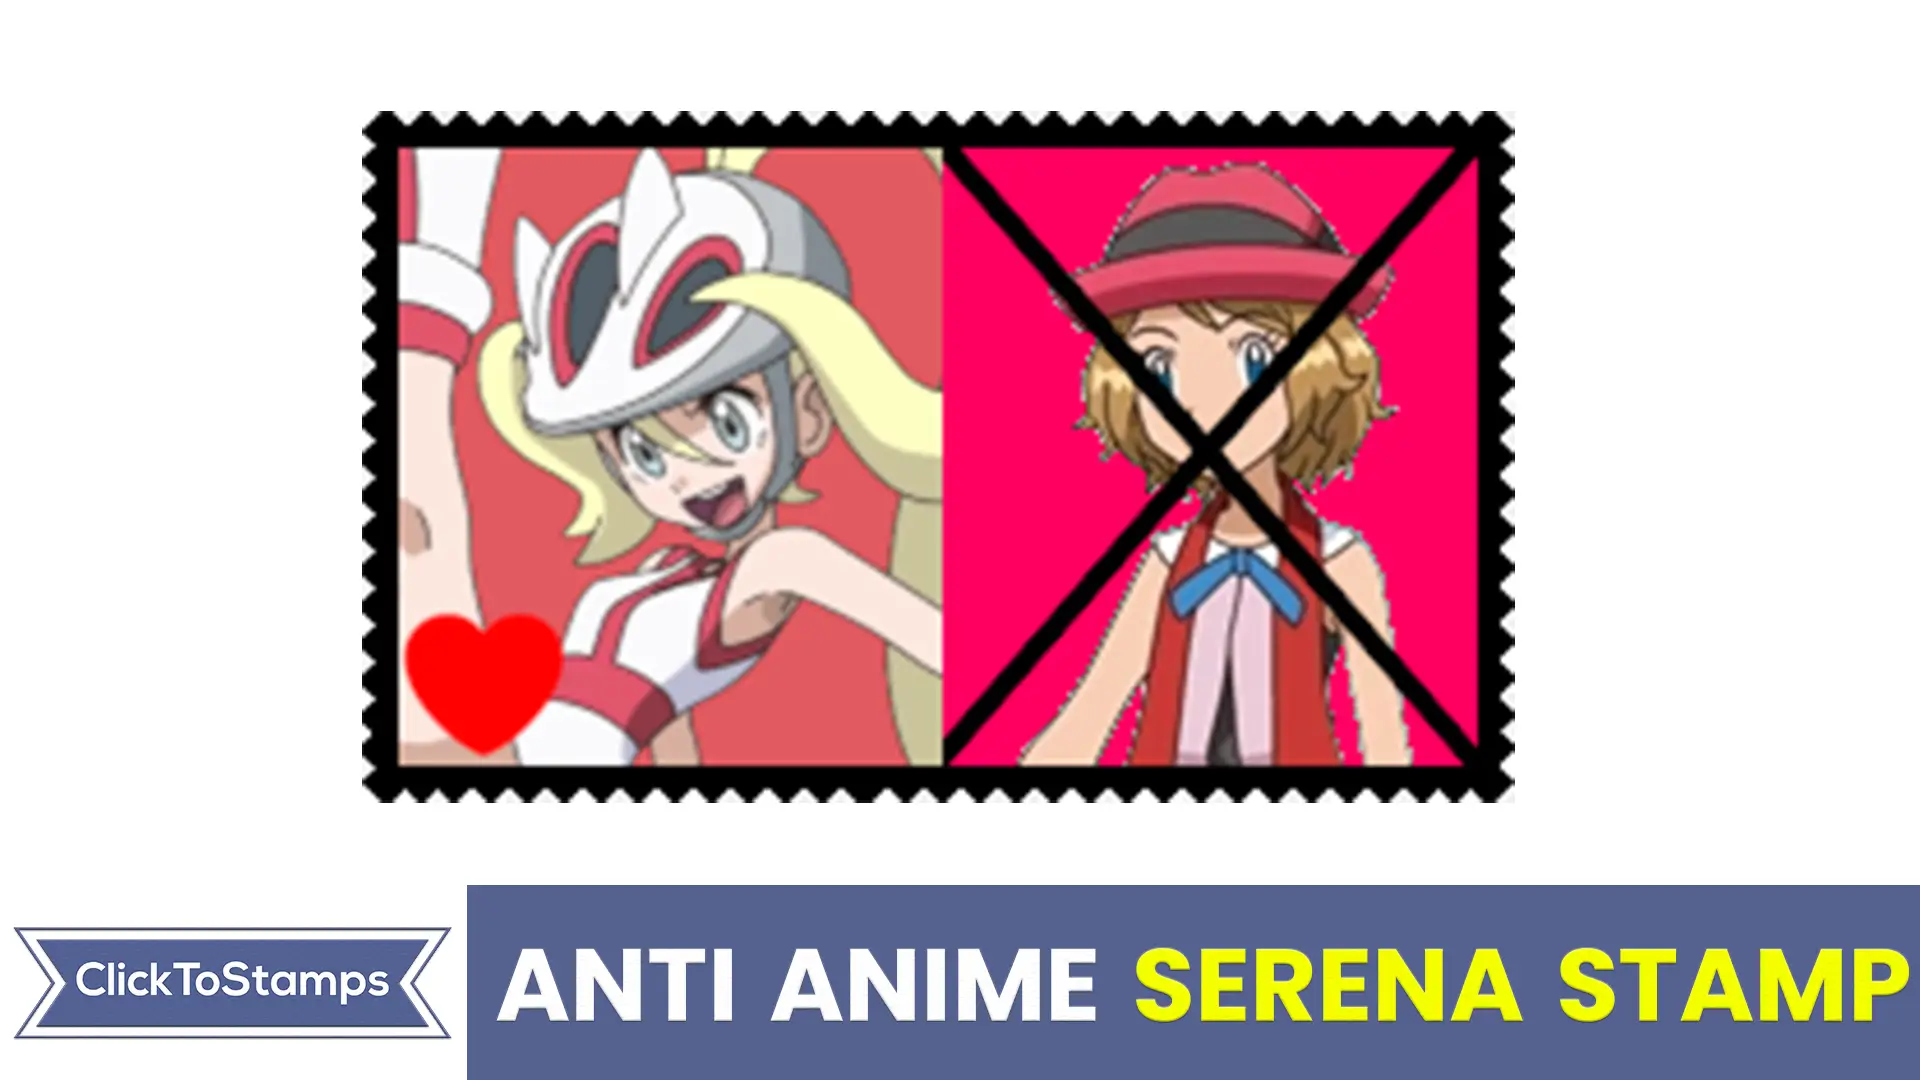 How-the-Anti-Anime-Serena-Stamp-is-Becoming-a-Symbol-of-Representation-and-Inclusion